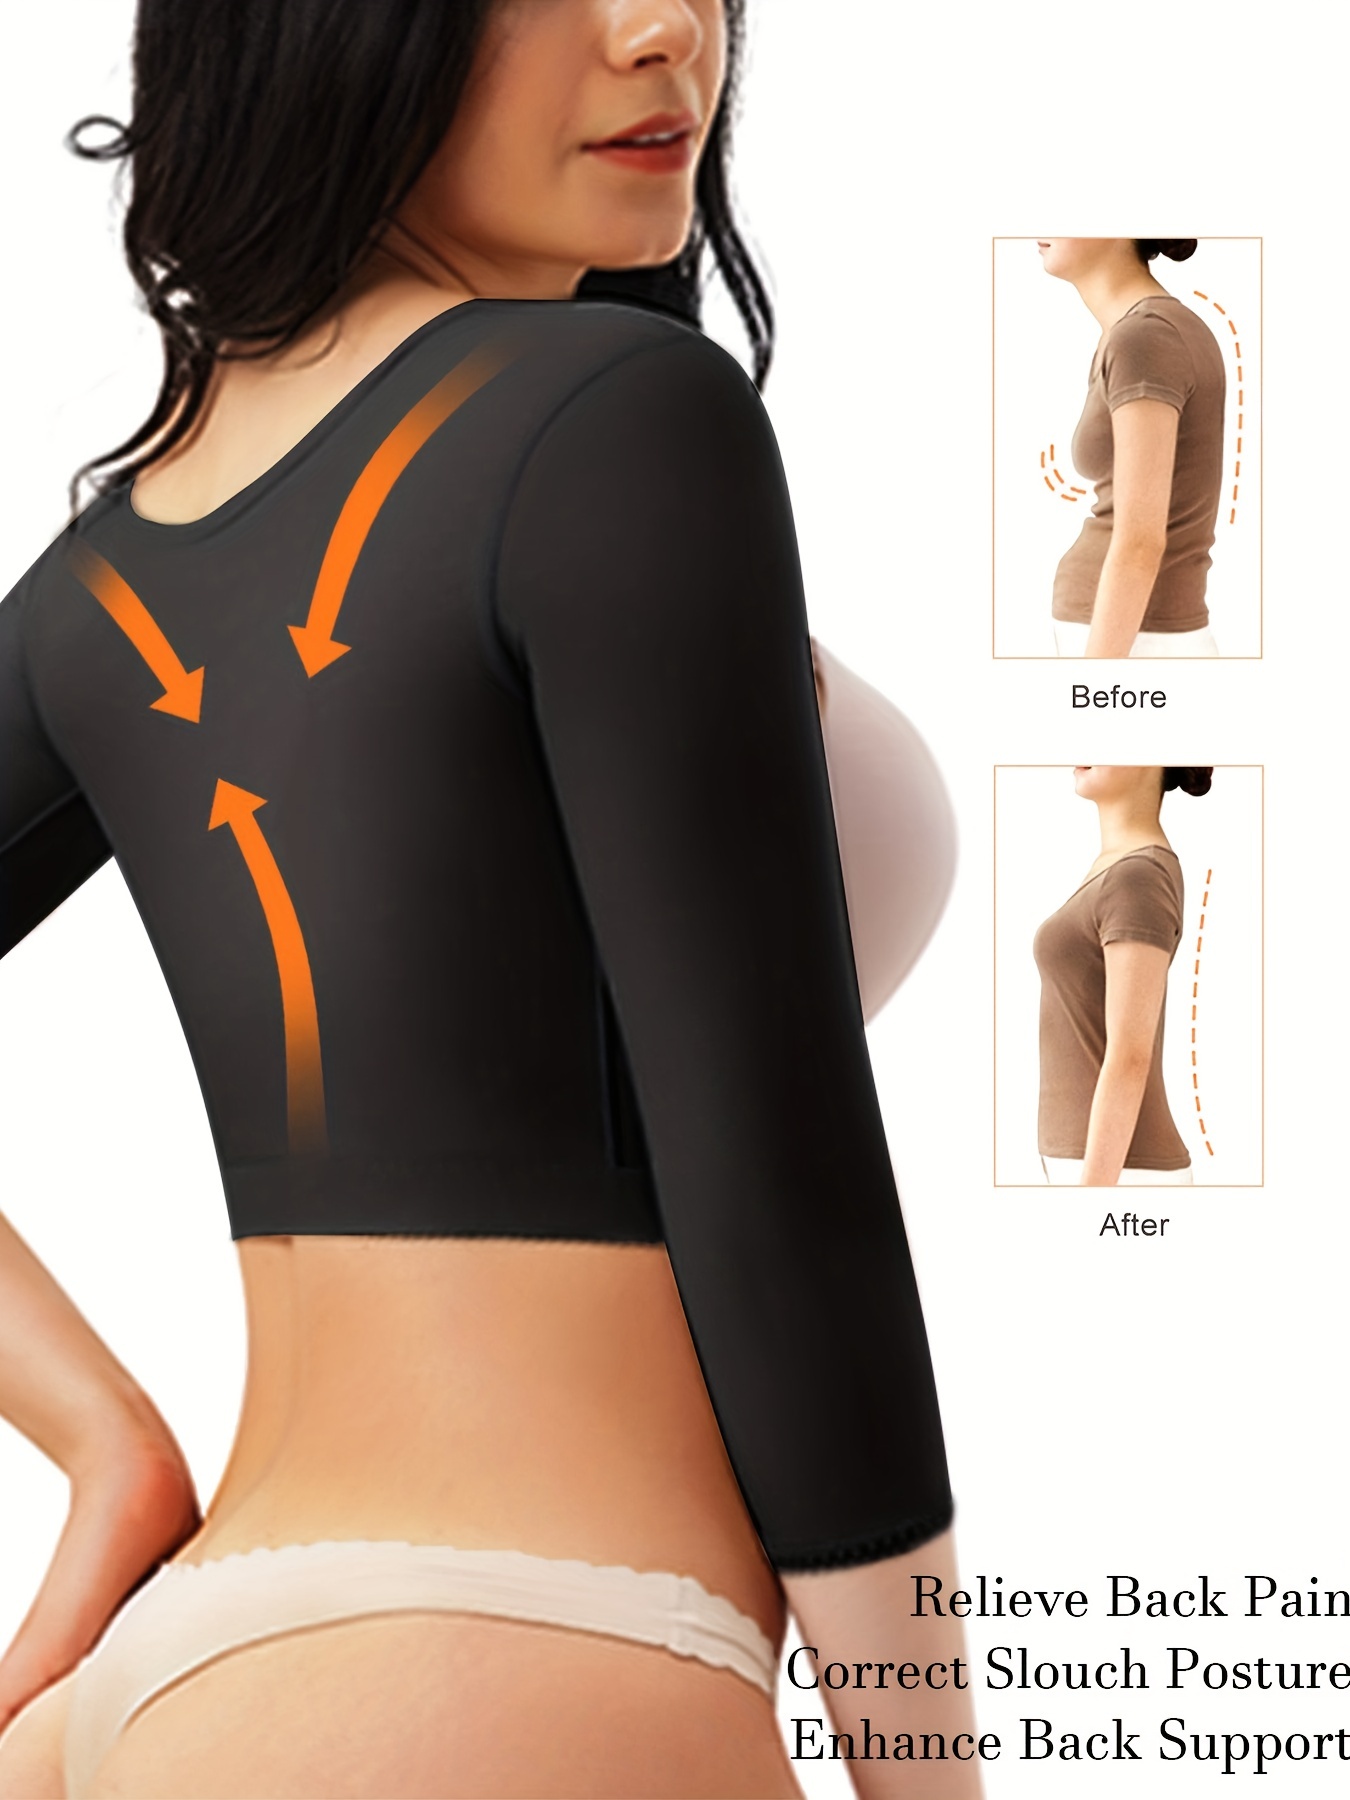 Front Buckle Shaping Tops, 3/4 Sleeve Posture Corrector Compression Slimmer  Crop Top, Women's Underwear & Shapewear